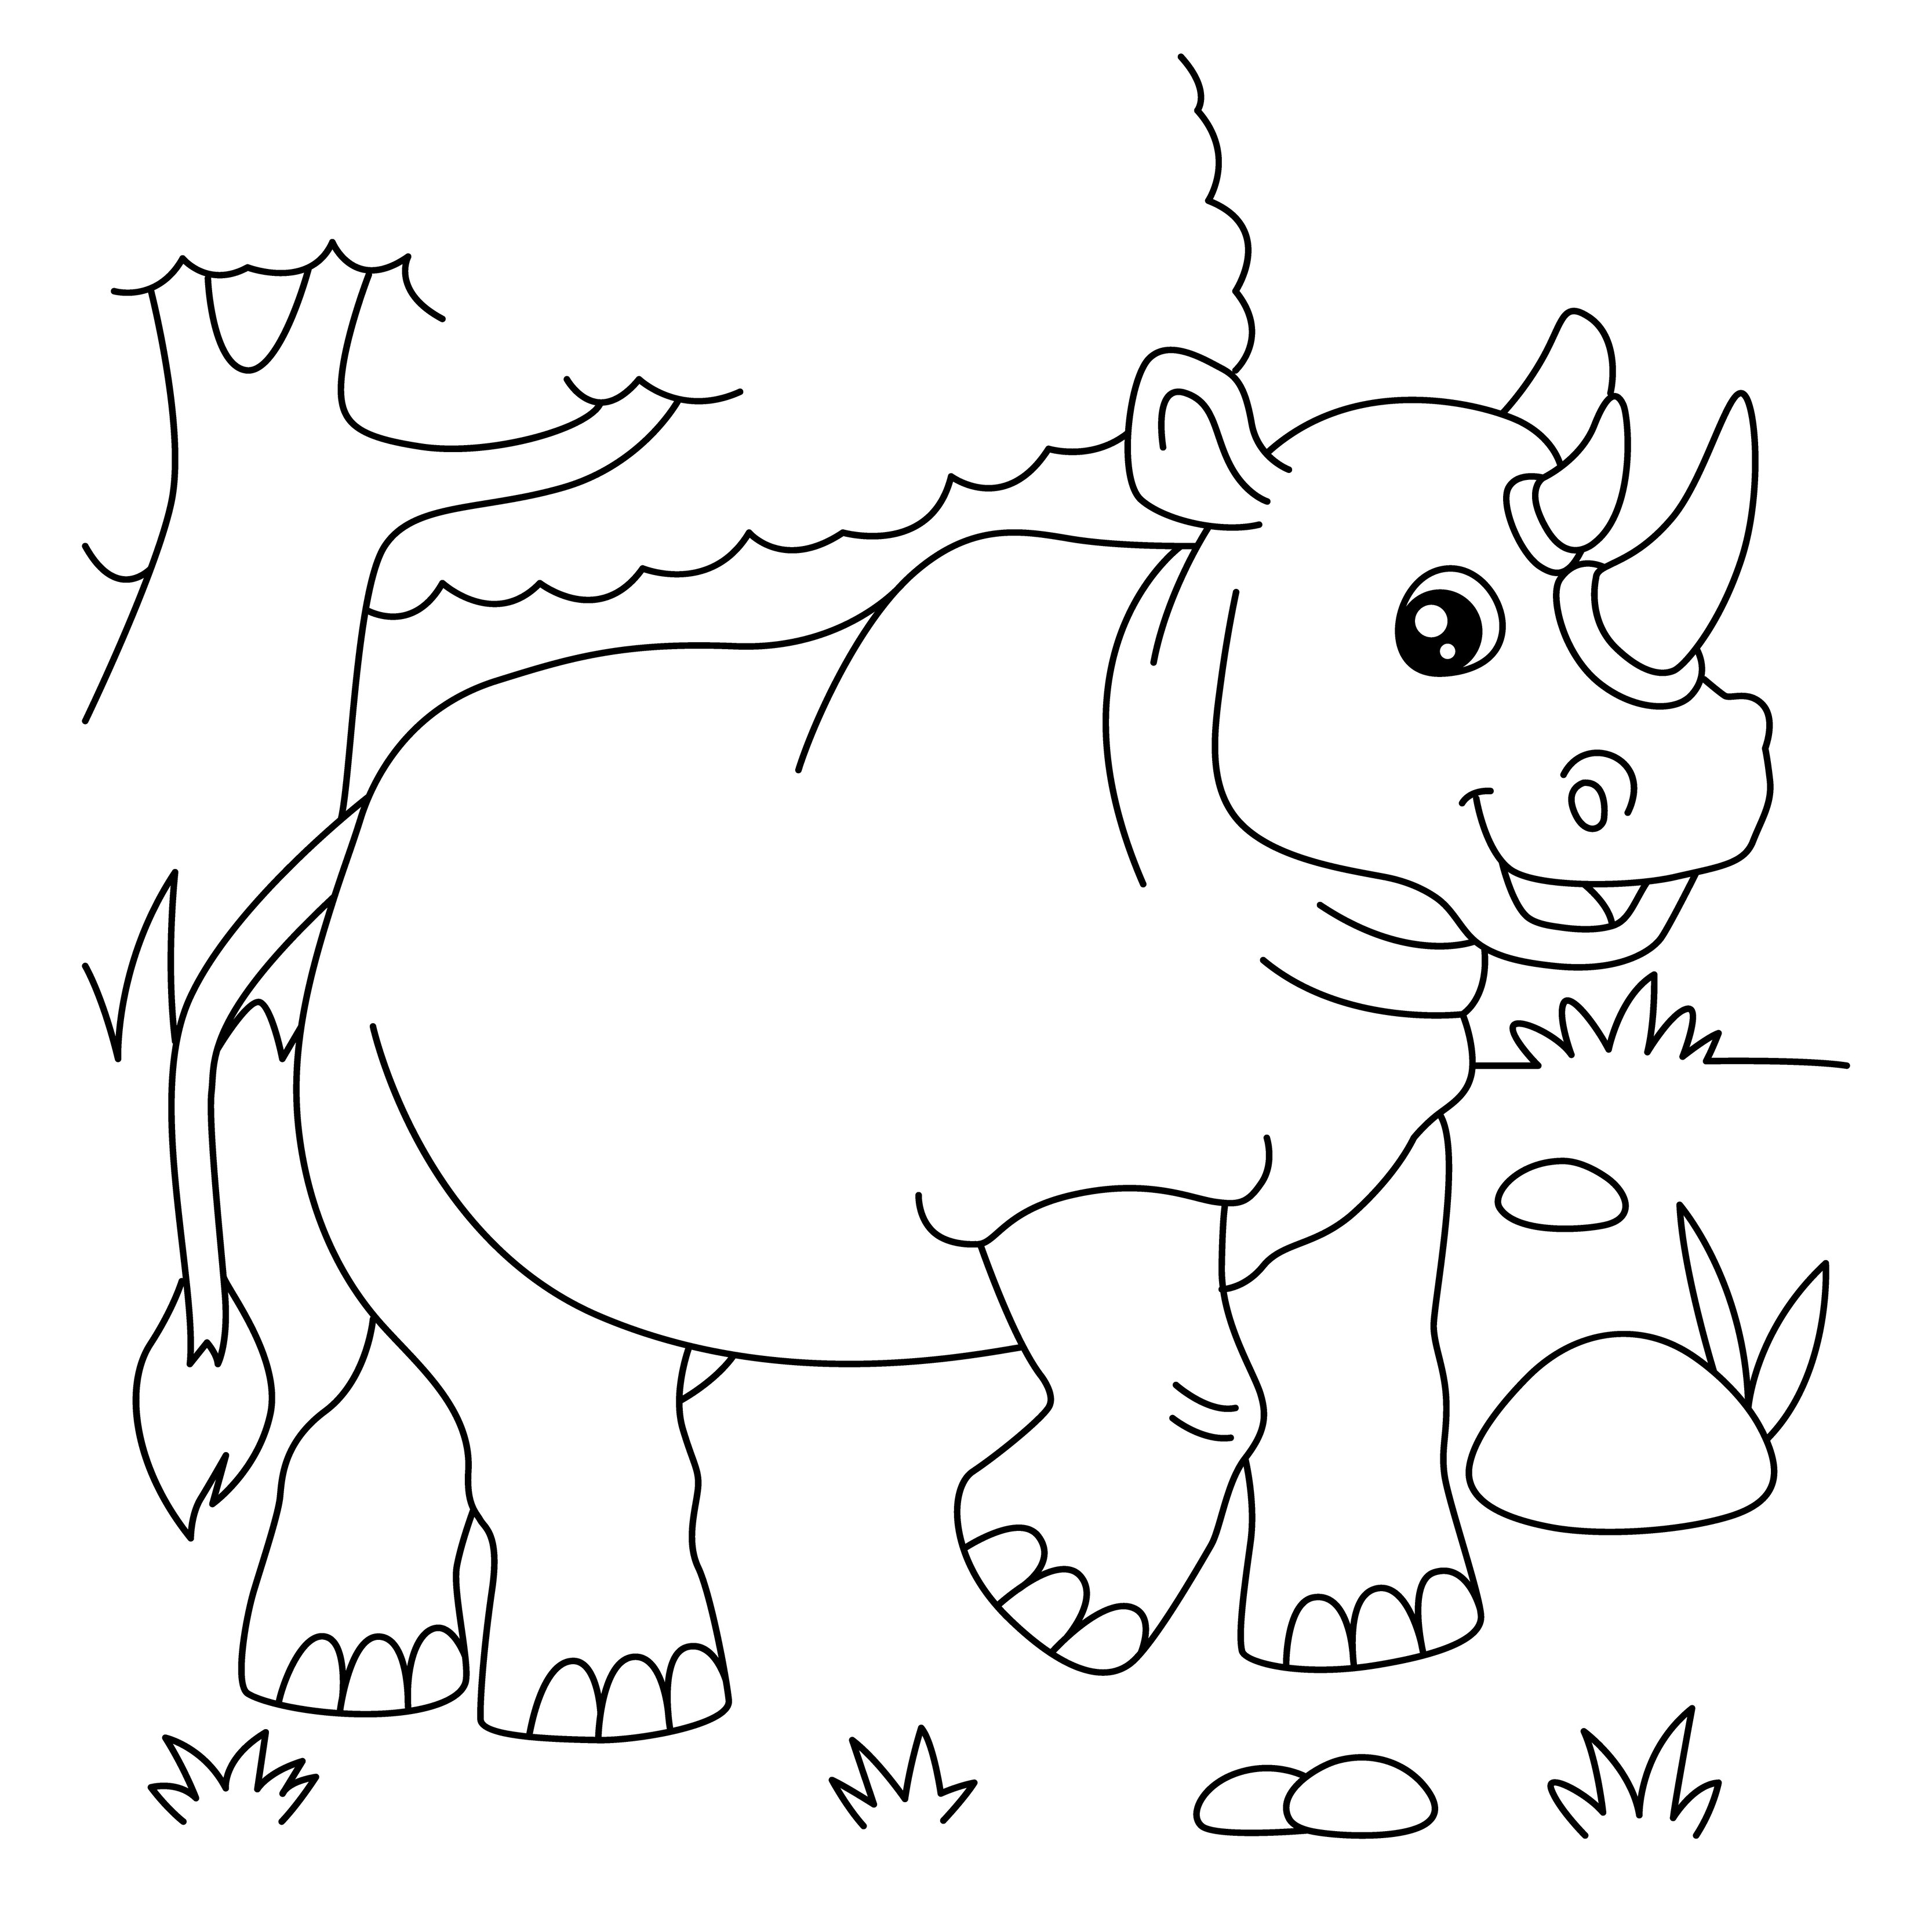 Rough woolly rhinoceros coloring page